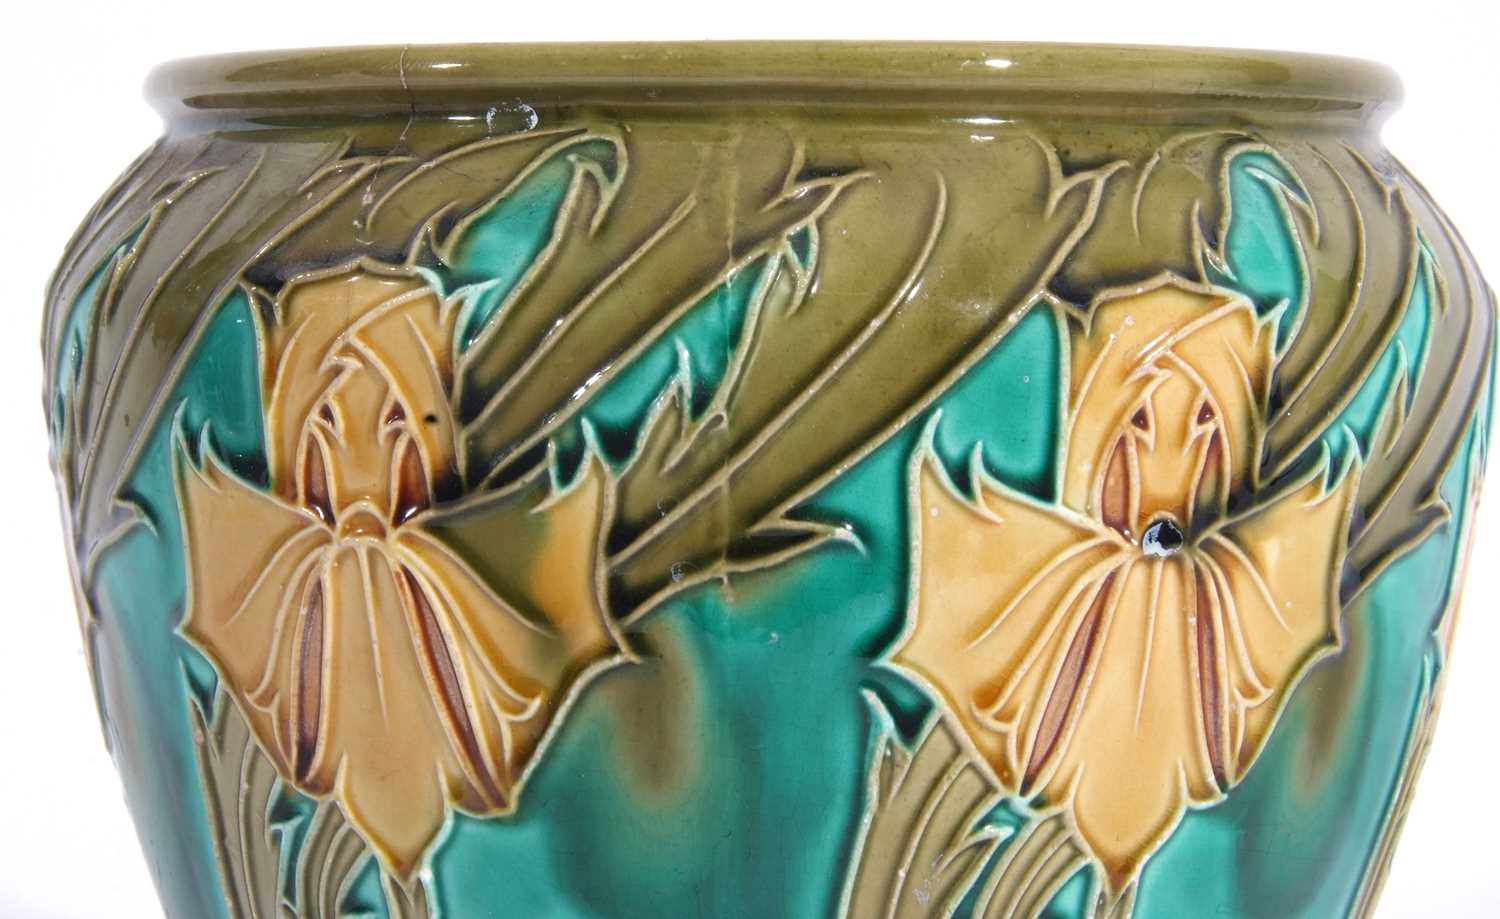 Minton Secessionist vase together with a Minton Secessionist jardiniere (crack to rim) (2) - Image 5 of 12